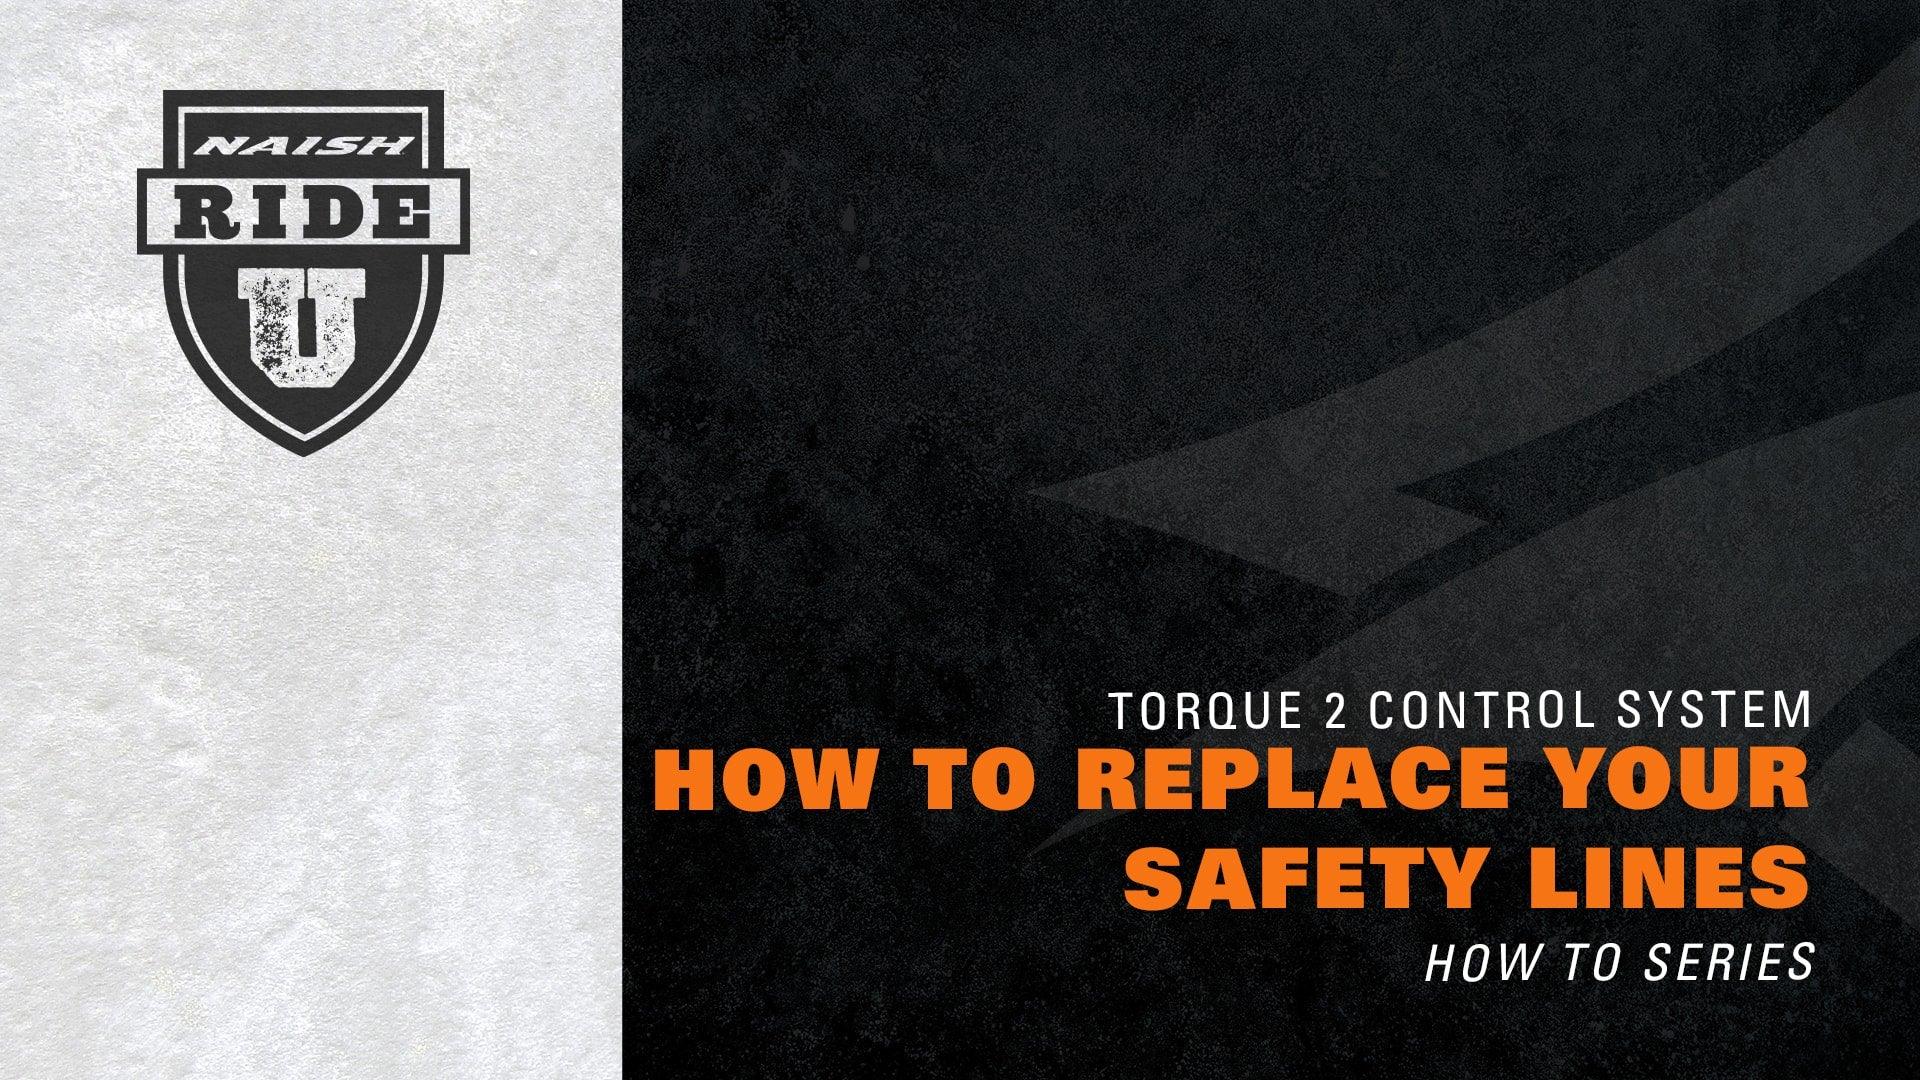 Torque 2 Control System Safety Line Replacement - Naish.com